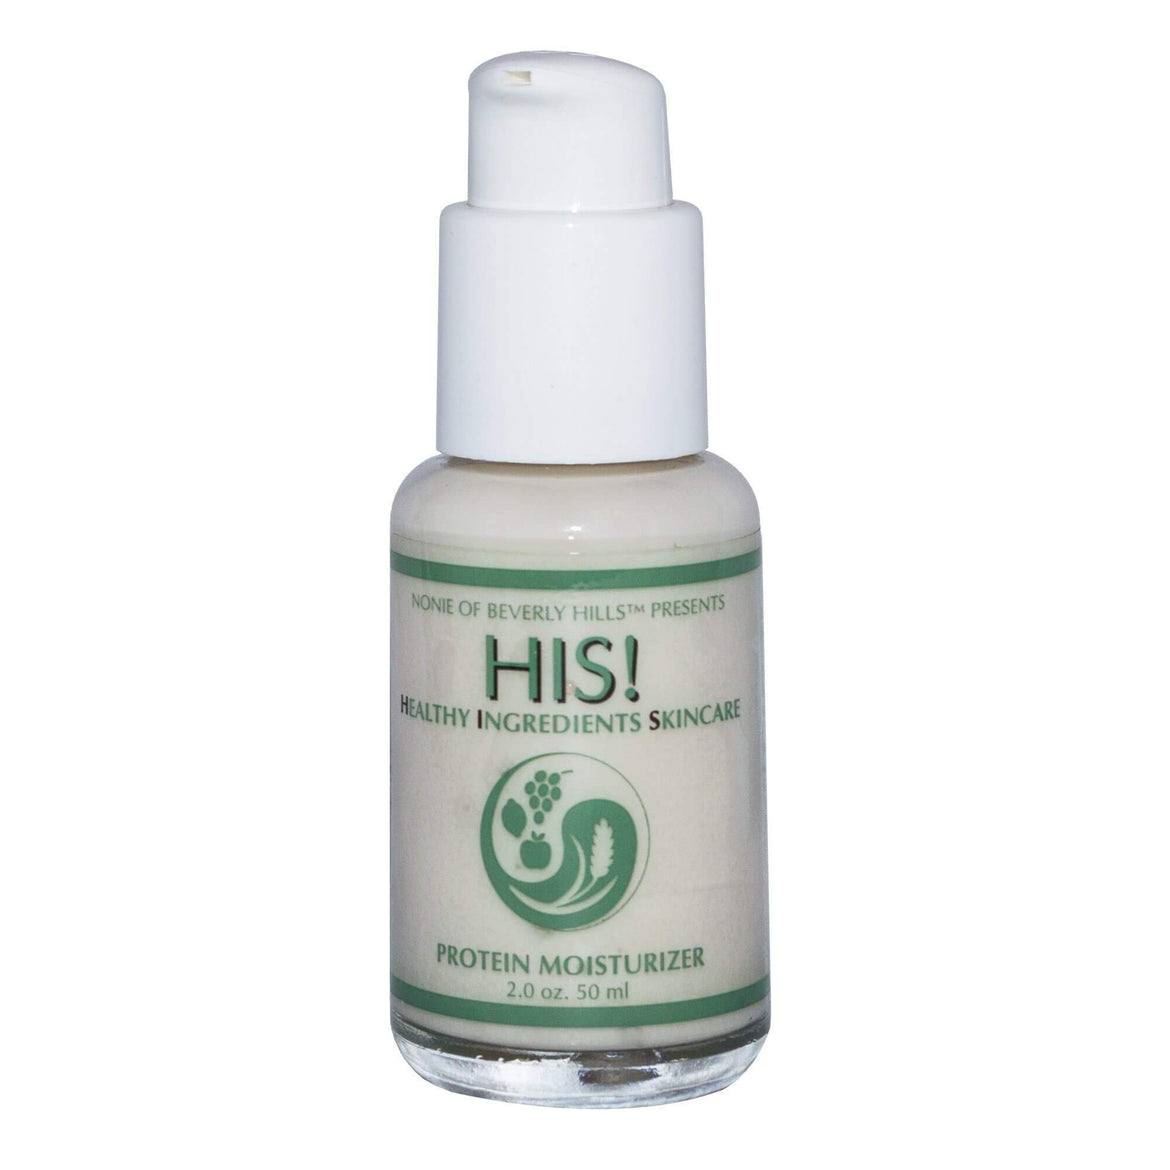 HIS! Protein Moisturizer 1.75 oz - for Dry/Mature Skin - Nonie of Beverly Hills